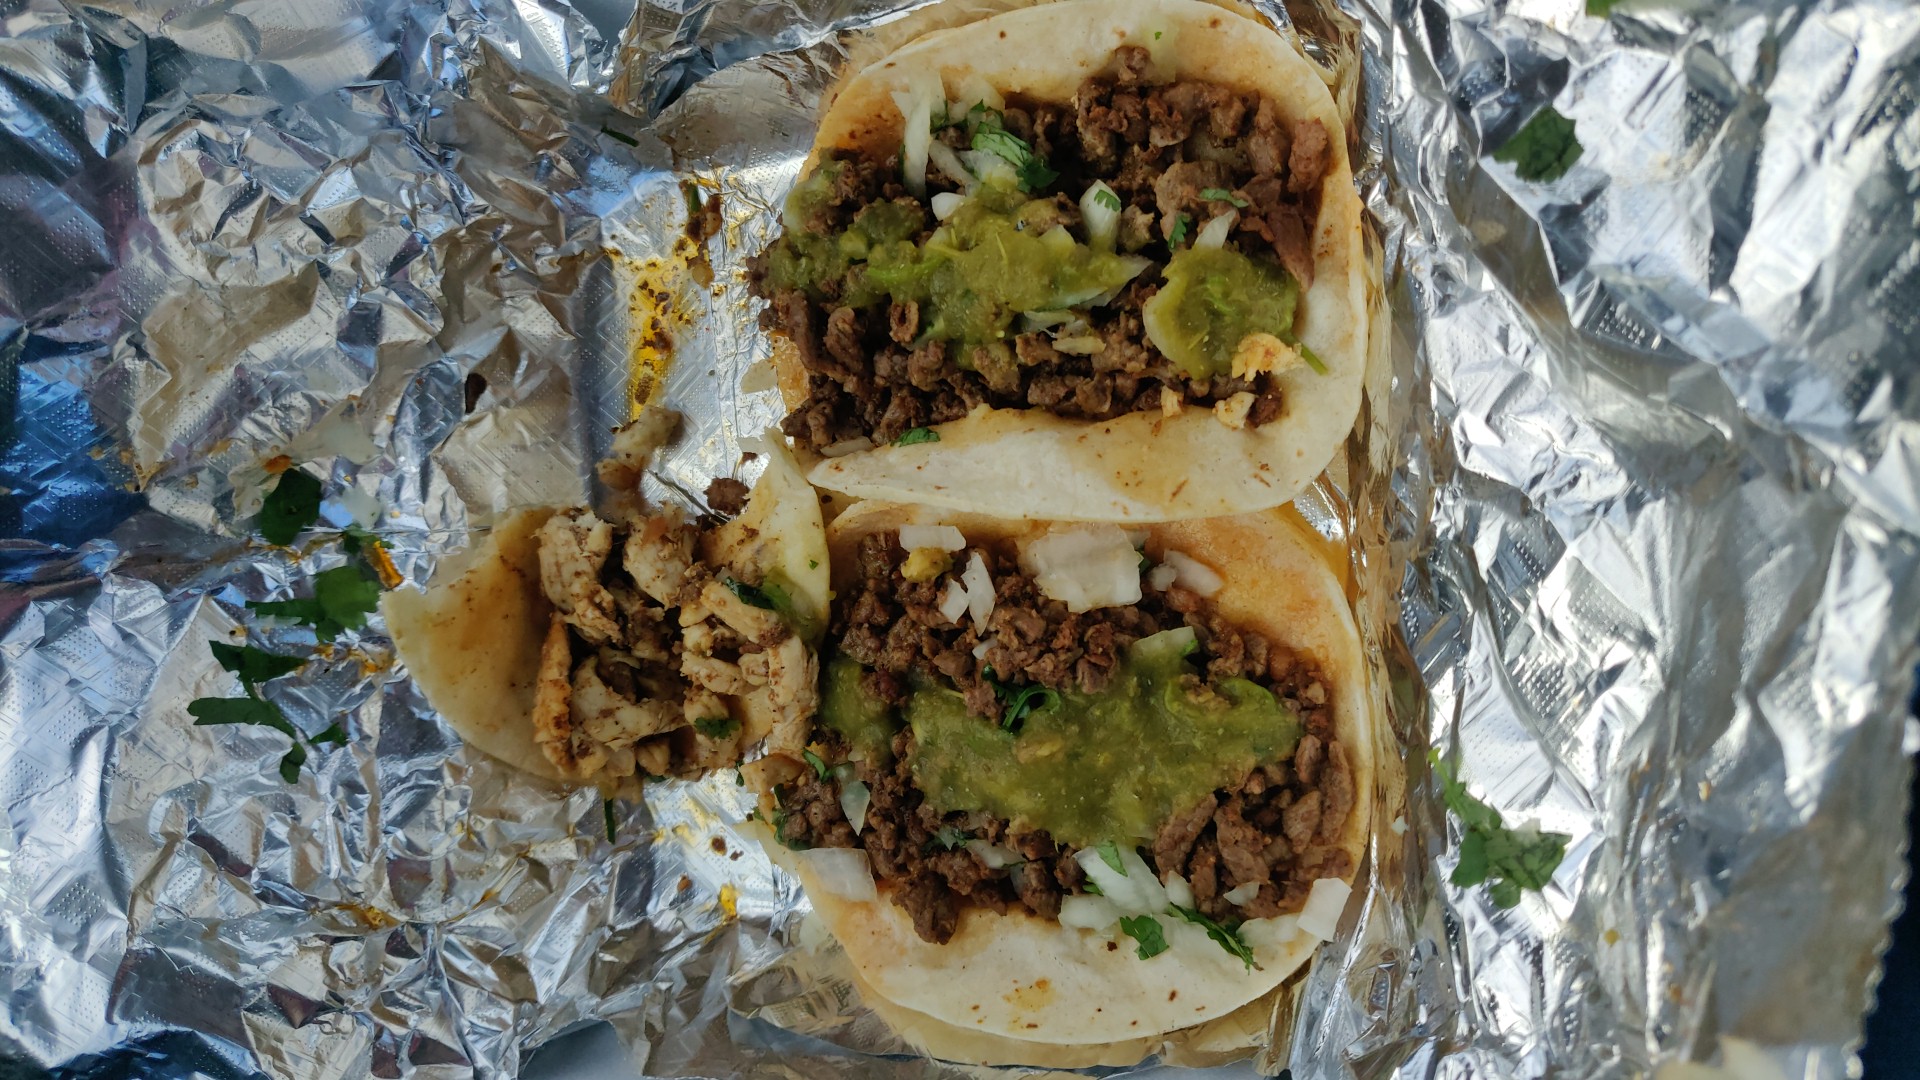 Tacos on the road